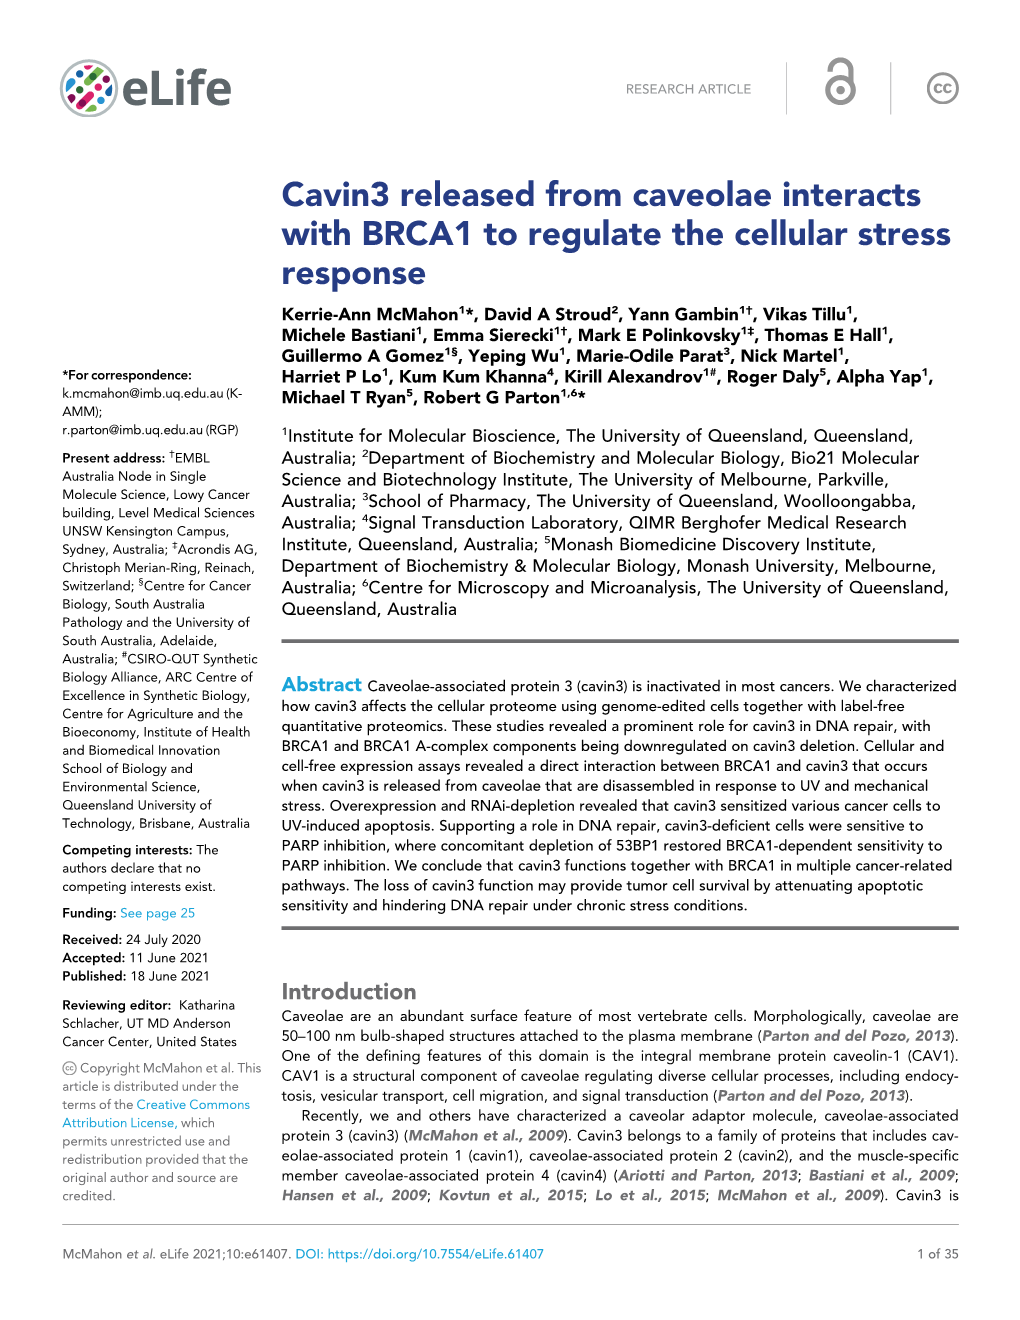 Cavin3 Released from Caveolae Interacts with BRCA1 to Regulate